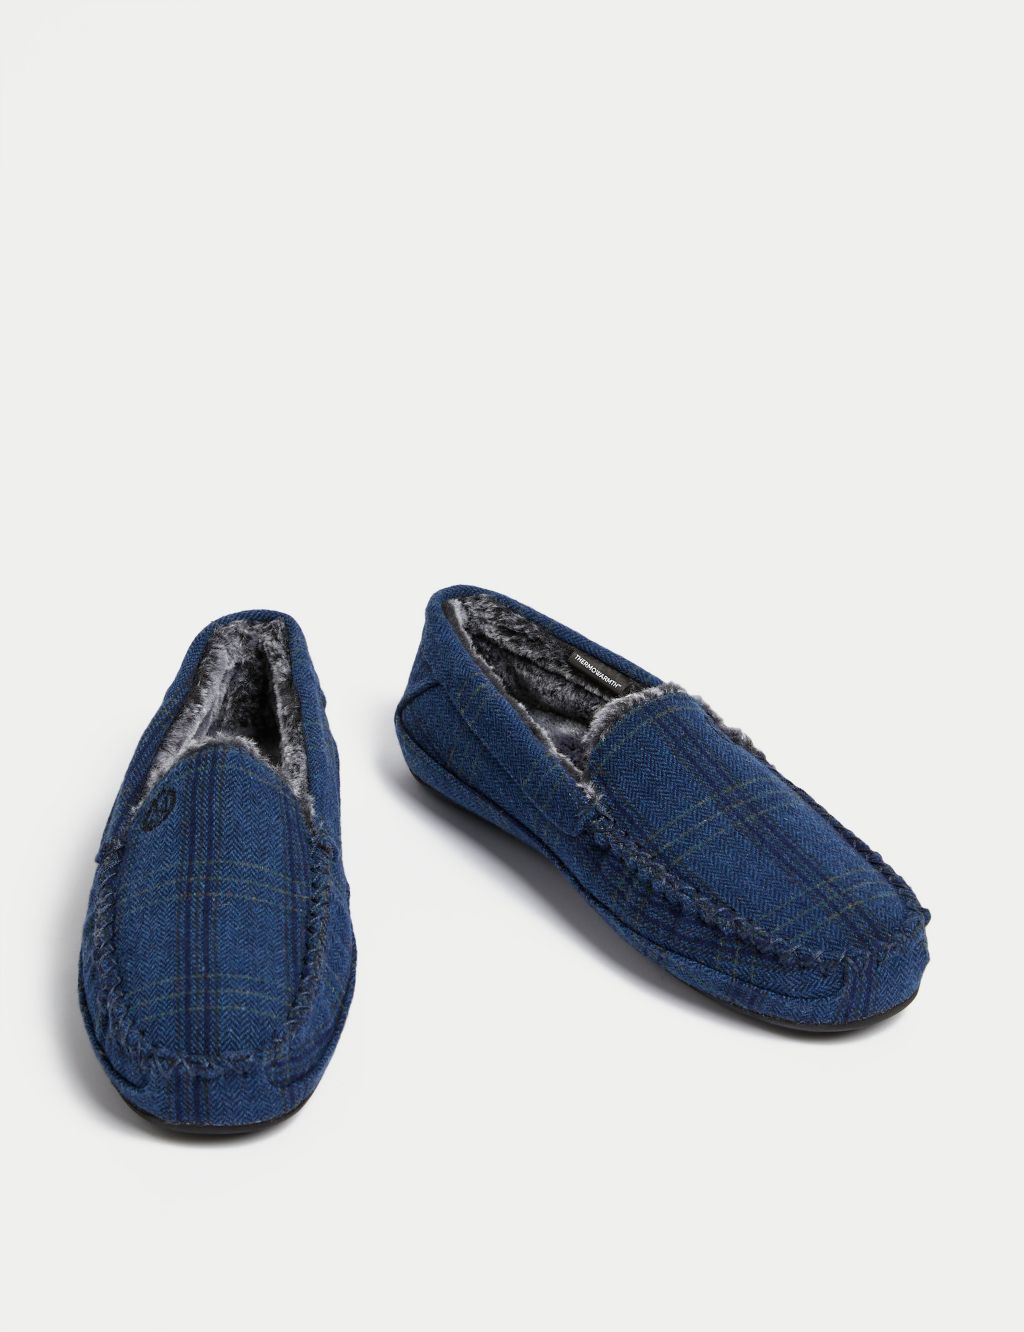 Fleece Lined Checked Moccasin Slippers image 2